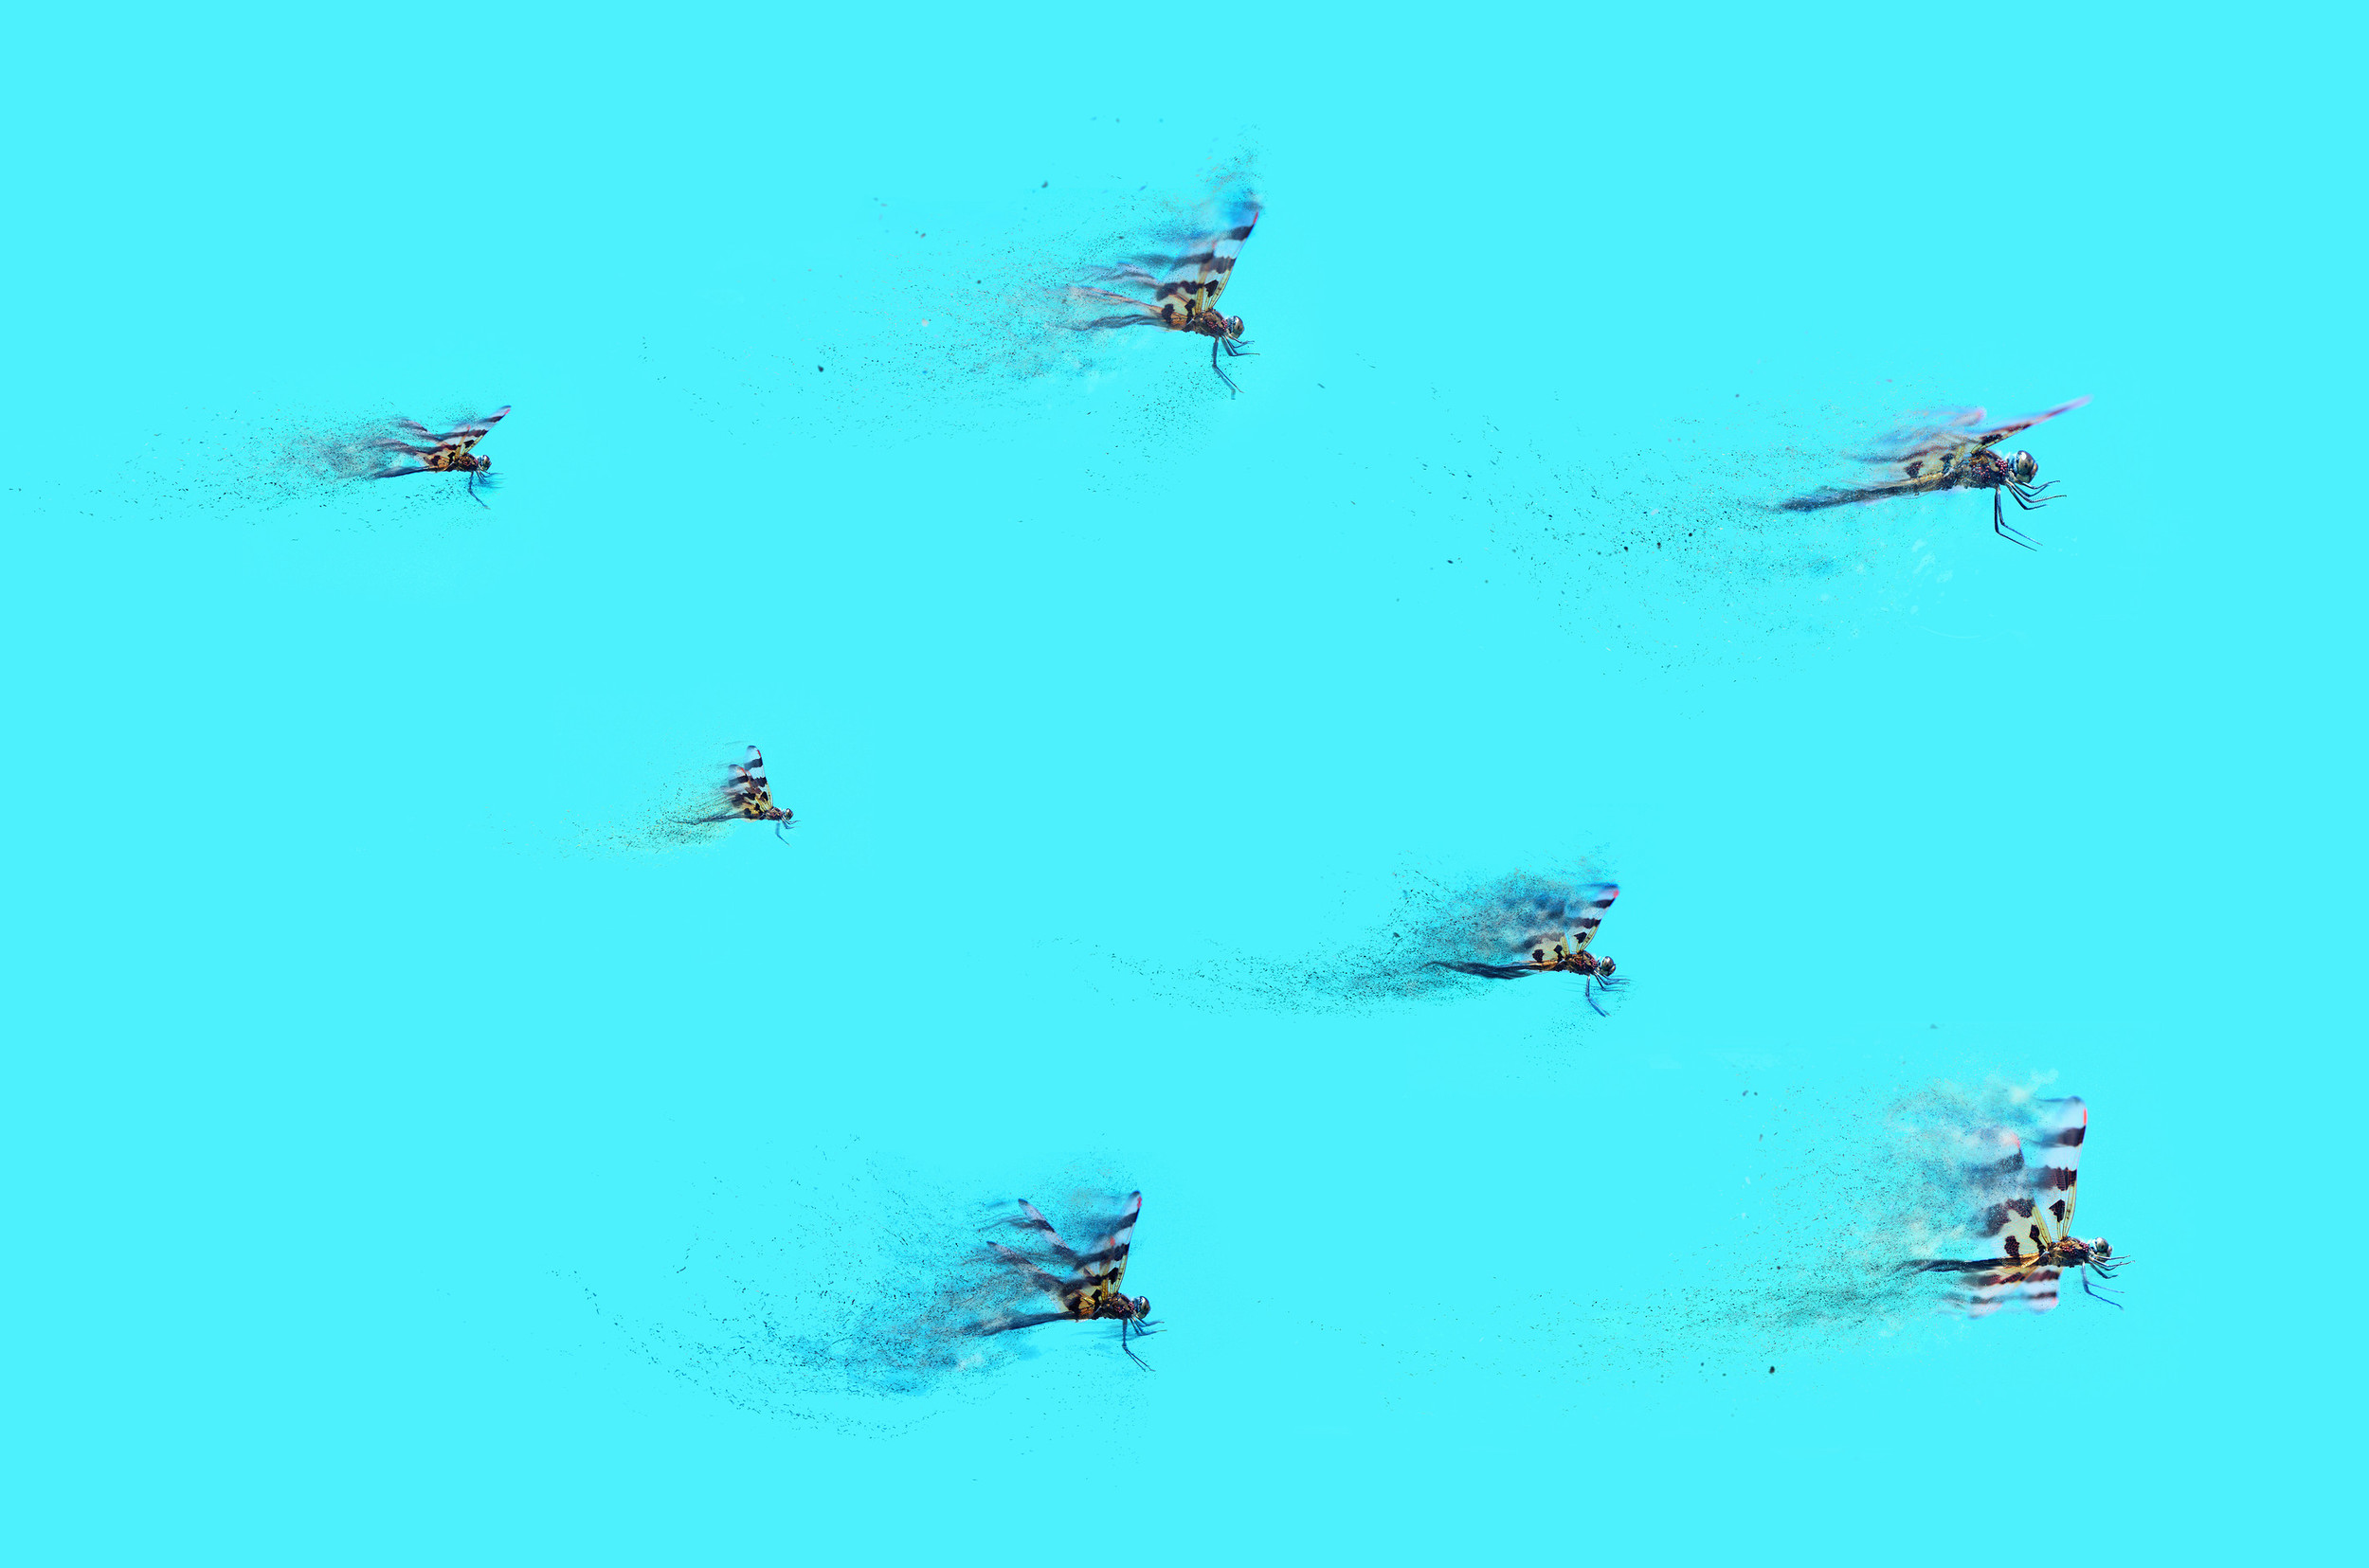 'Odonata leader to drag squadron, tighten up formation and keep your eyes peeled for bogeys' Digital Photography on Aluminum, 48" x 28" $795